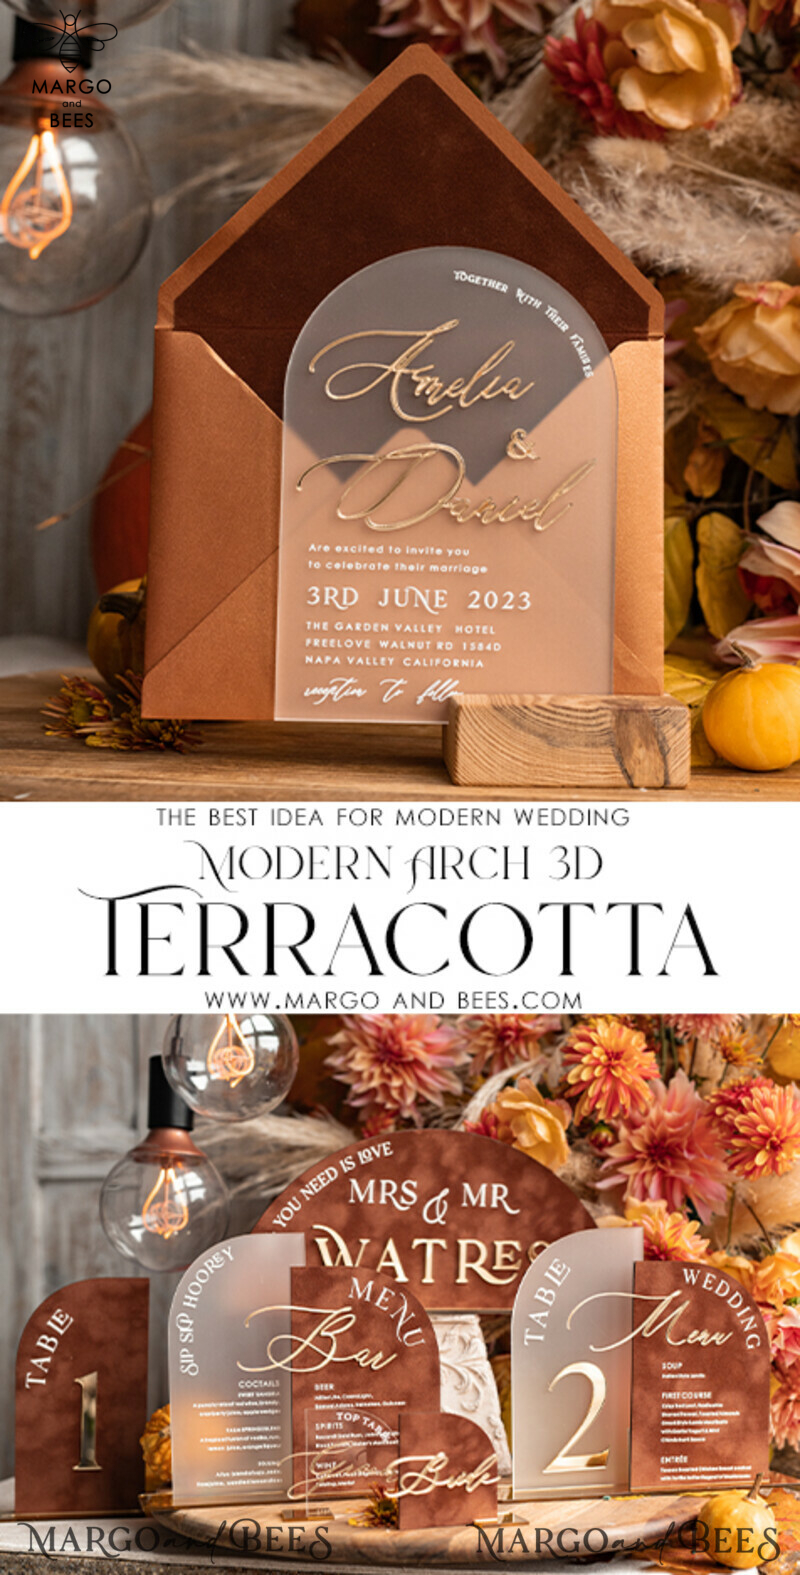 Elegant Fall Terracotta Modern Arch 3D Wedding Invitation Suite with Bespoke Frozen Acrylic Gold Touches
Luxury Velvet Wedding Invitations with Frosted Plexi Glass and Golden Names
Glamour Wedding Invitation Suite featuring 3D Gold Mirror and Fall Copper Invites
Exquisite Wedding Cards: A Perfect Blend of Style and Sophistication-7